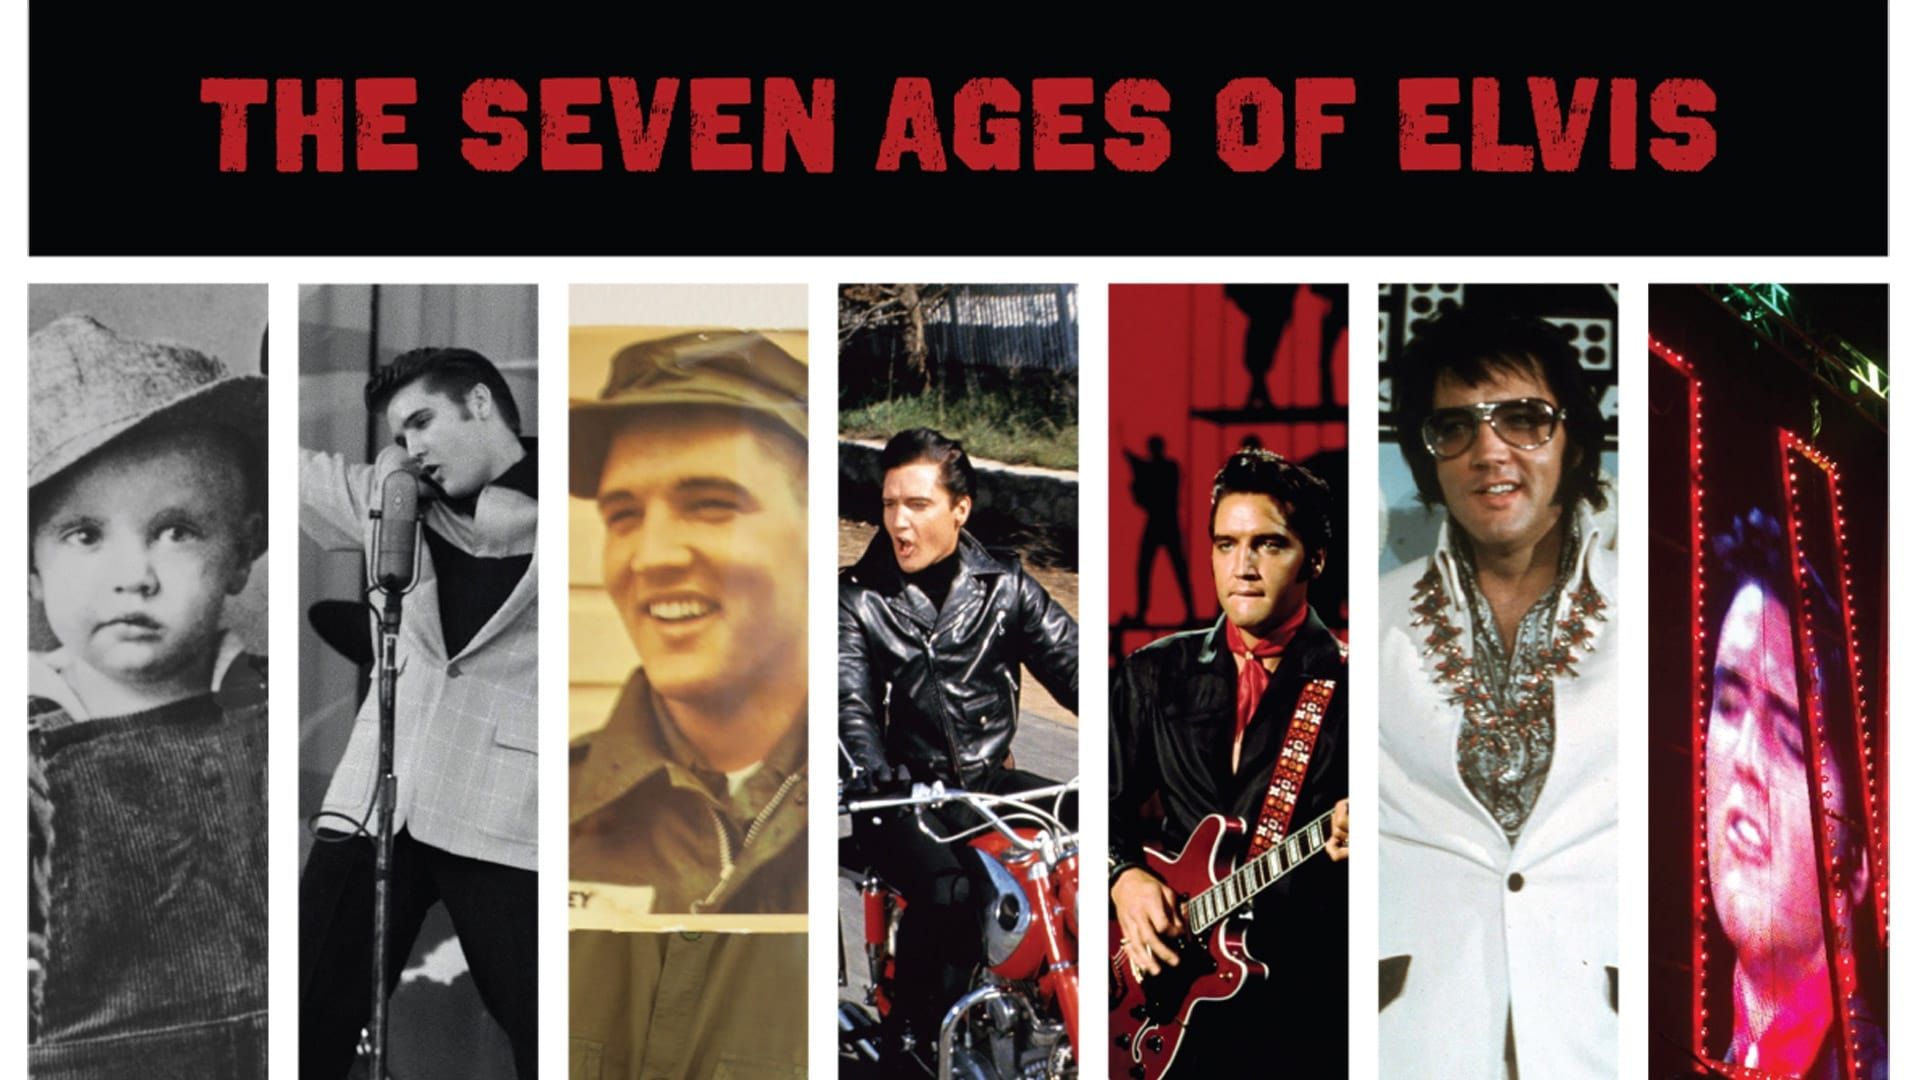 The Seven Ages of Elvis background